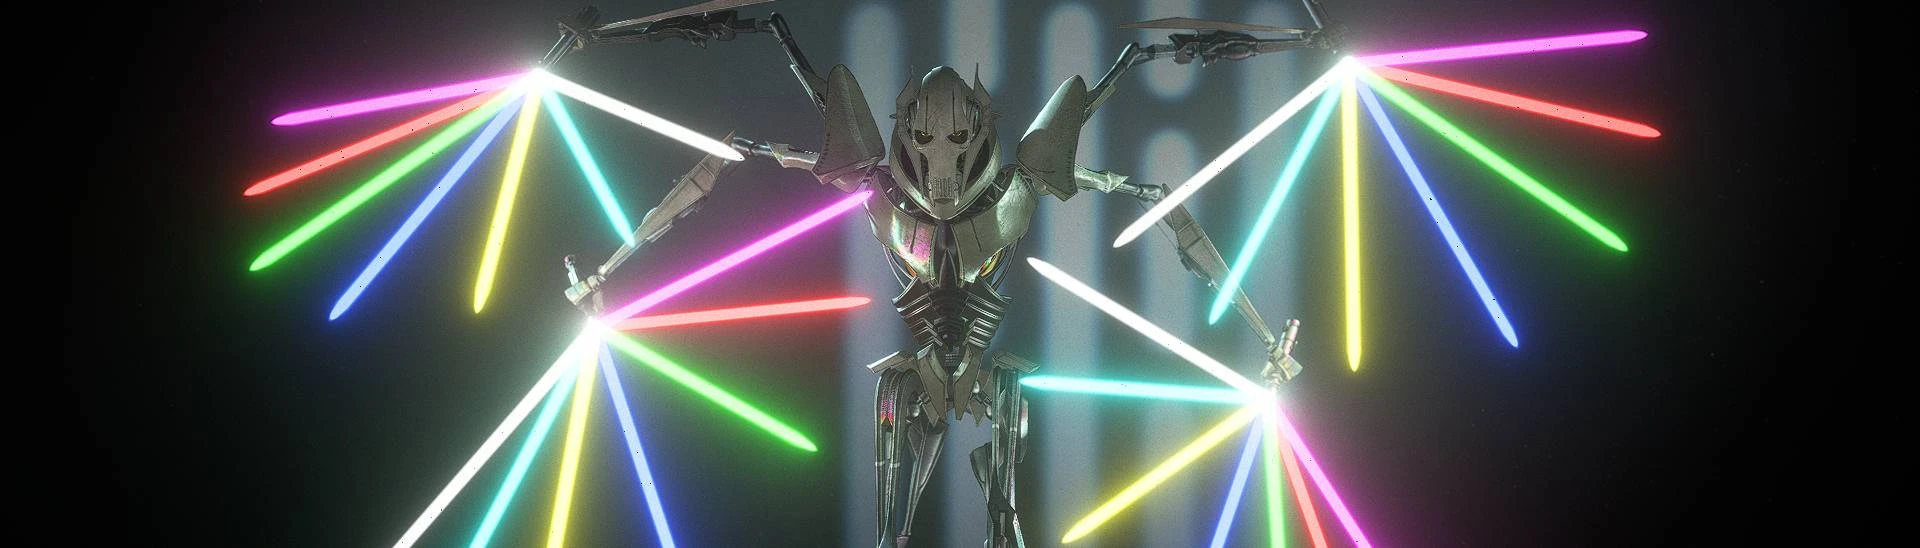 General Grievous' Lightsabers: Image Gallery (List View)